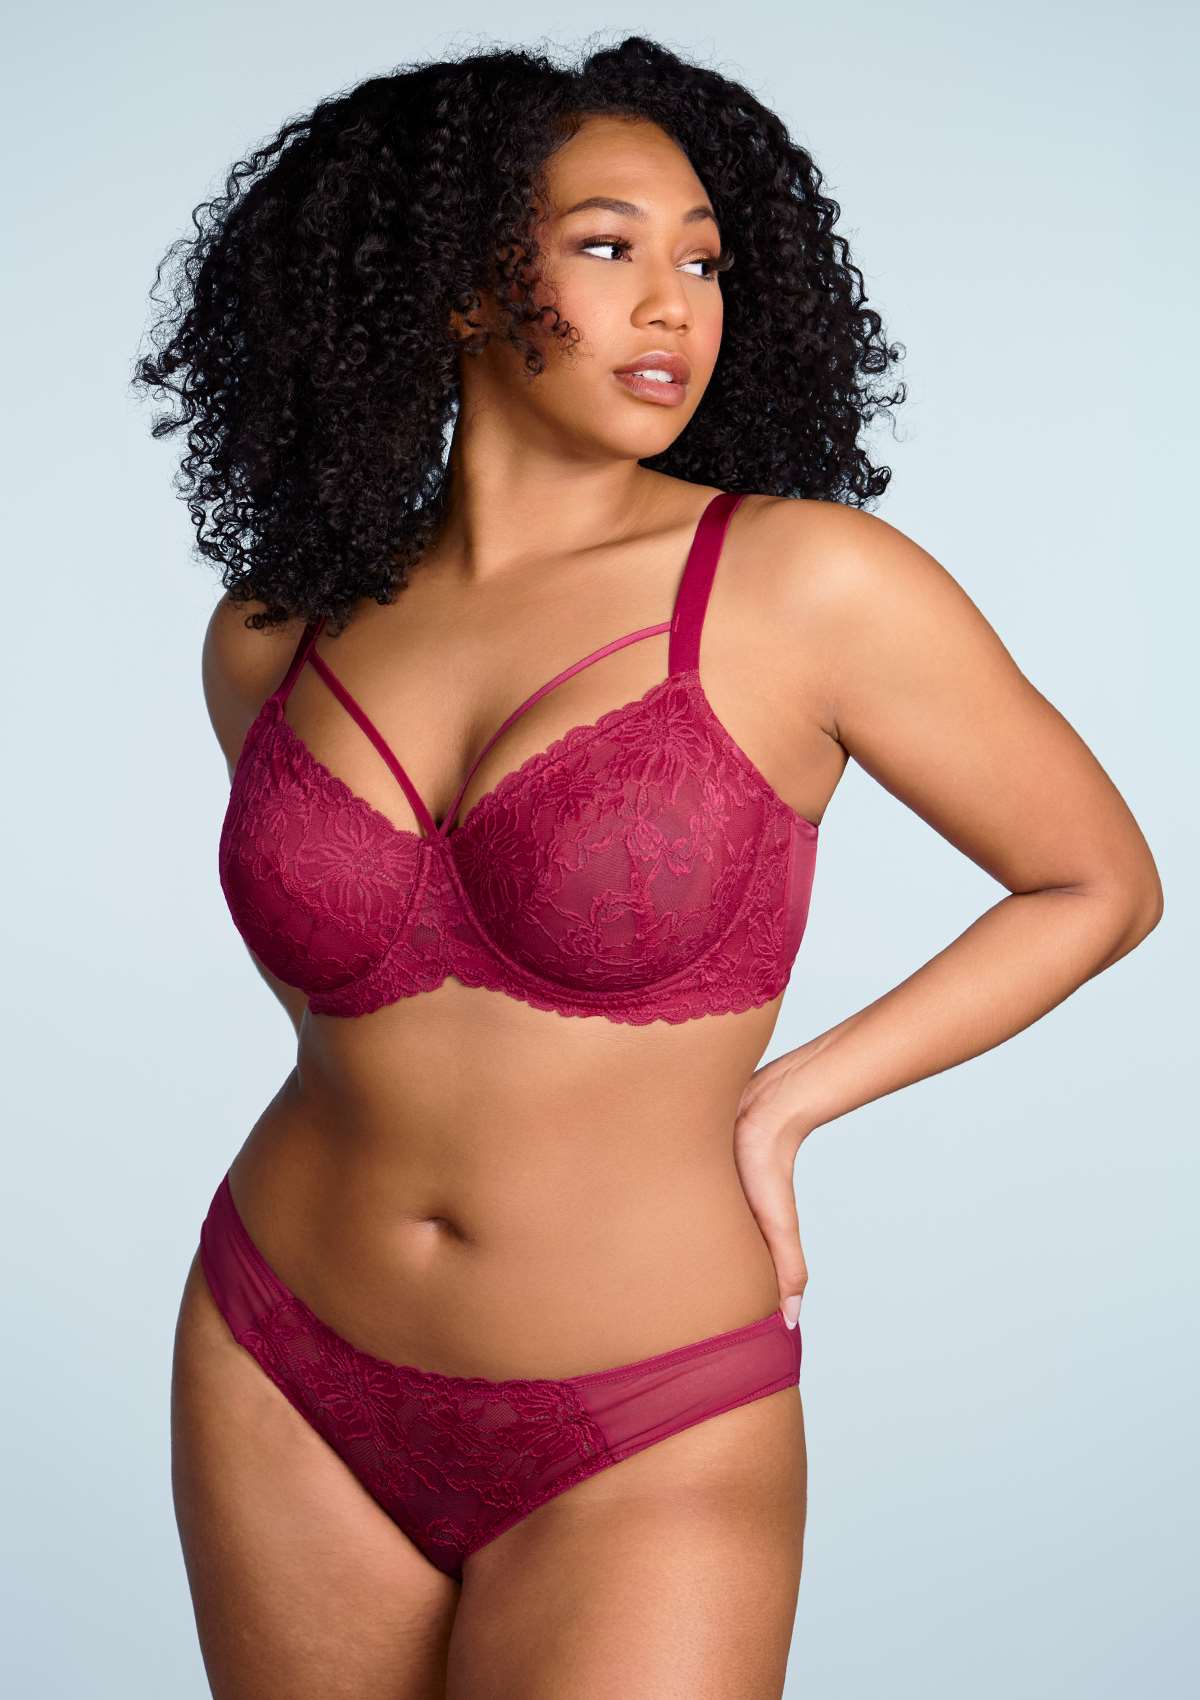 HSIA Pretty In Petals Lace Panties And Bra Set: Plus Size Women Bra - Red / 36 / H